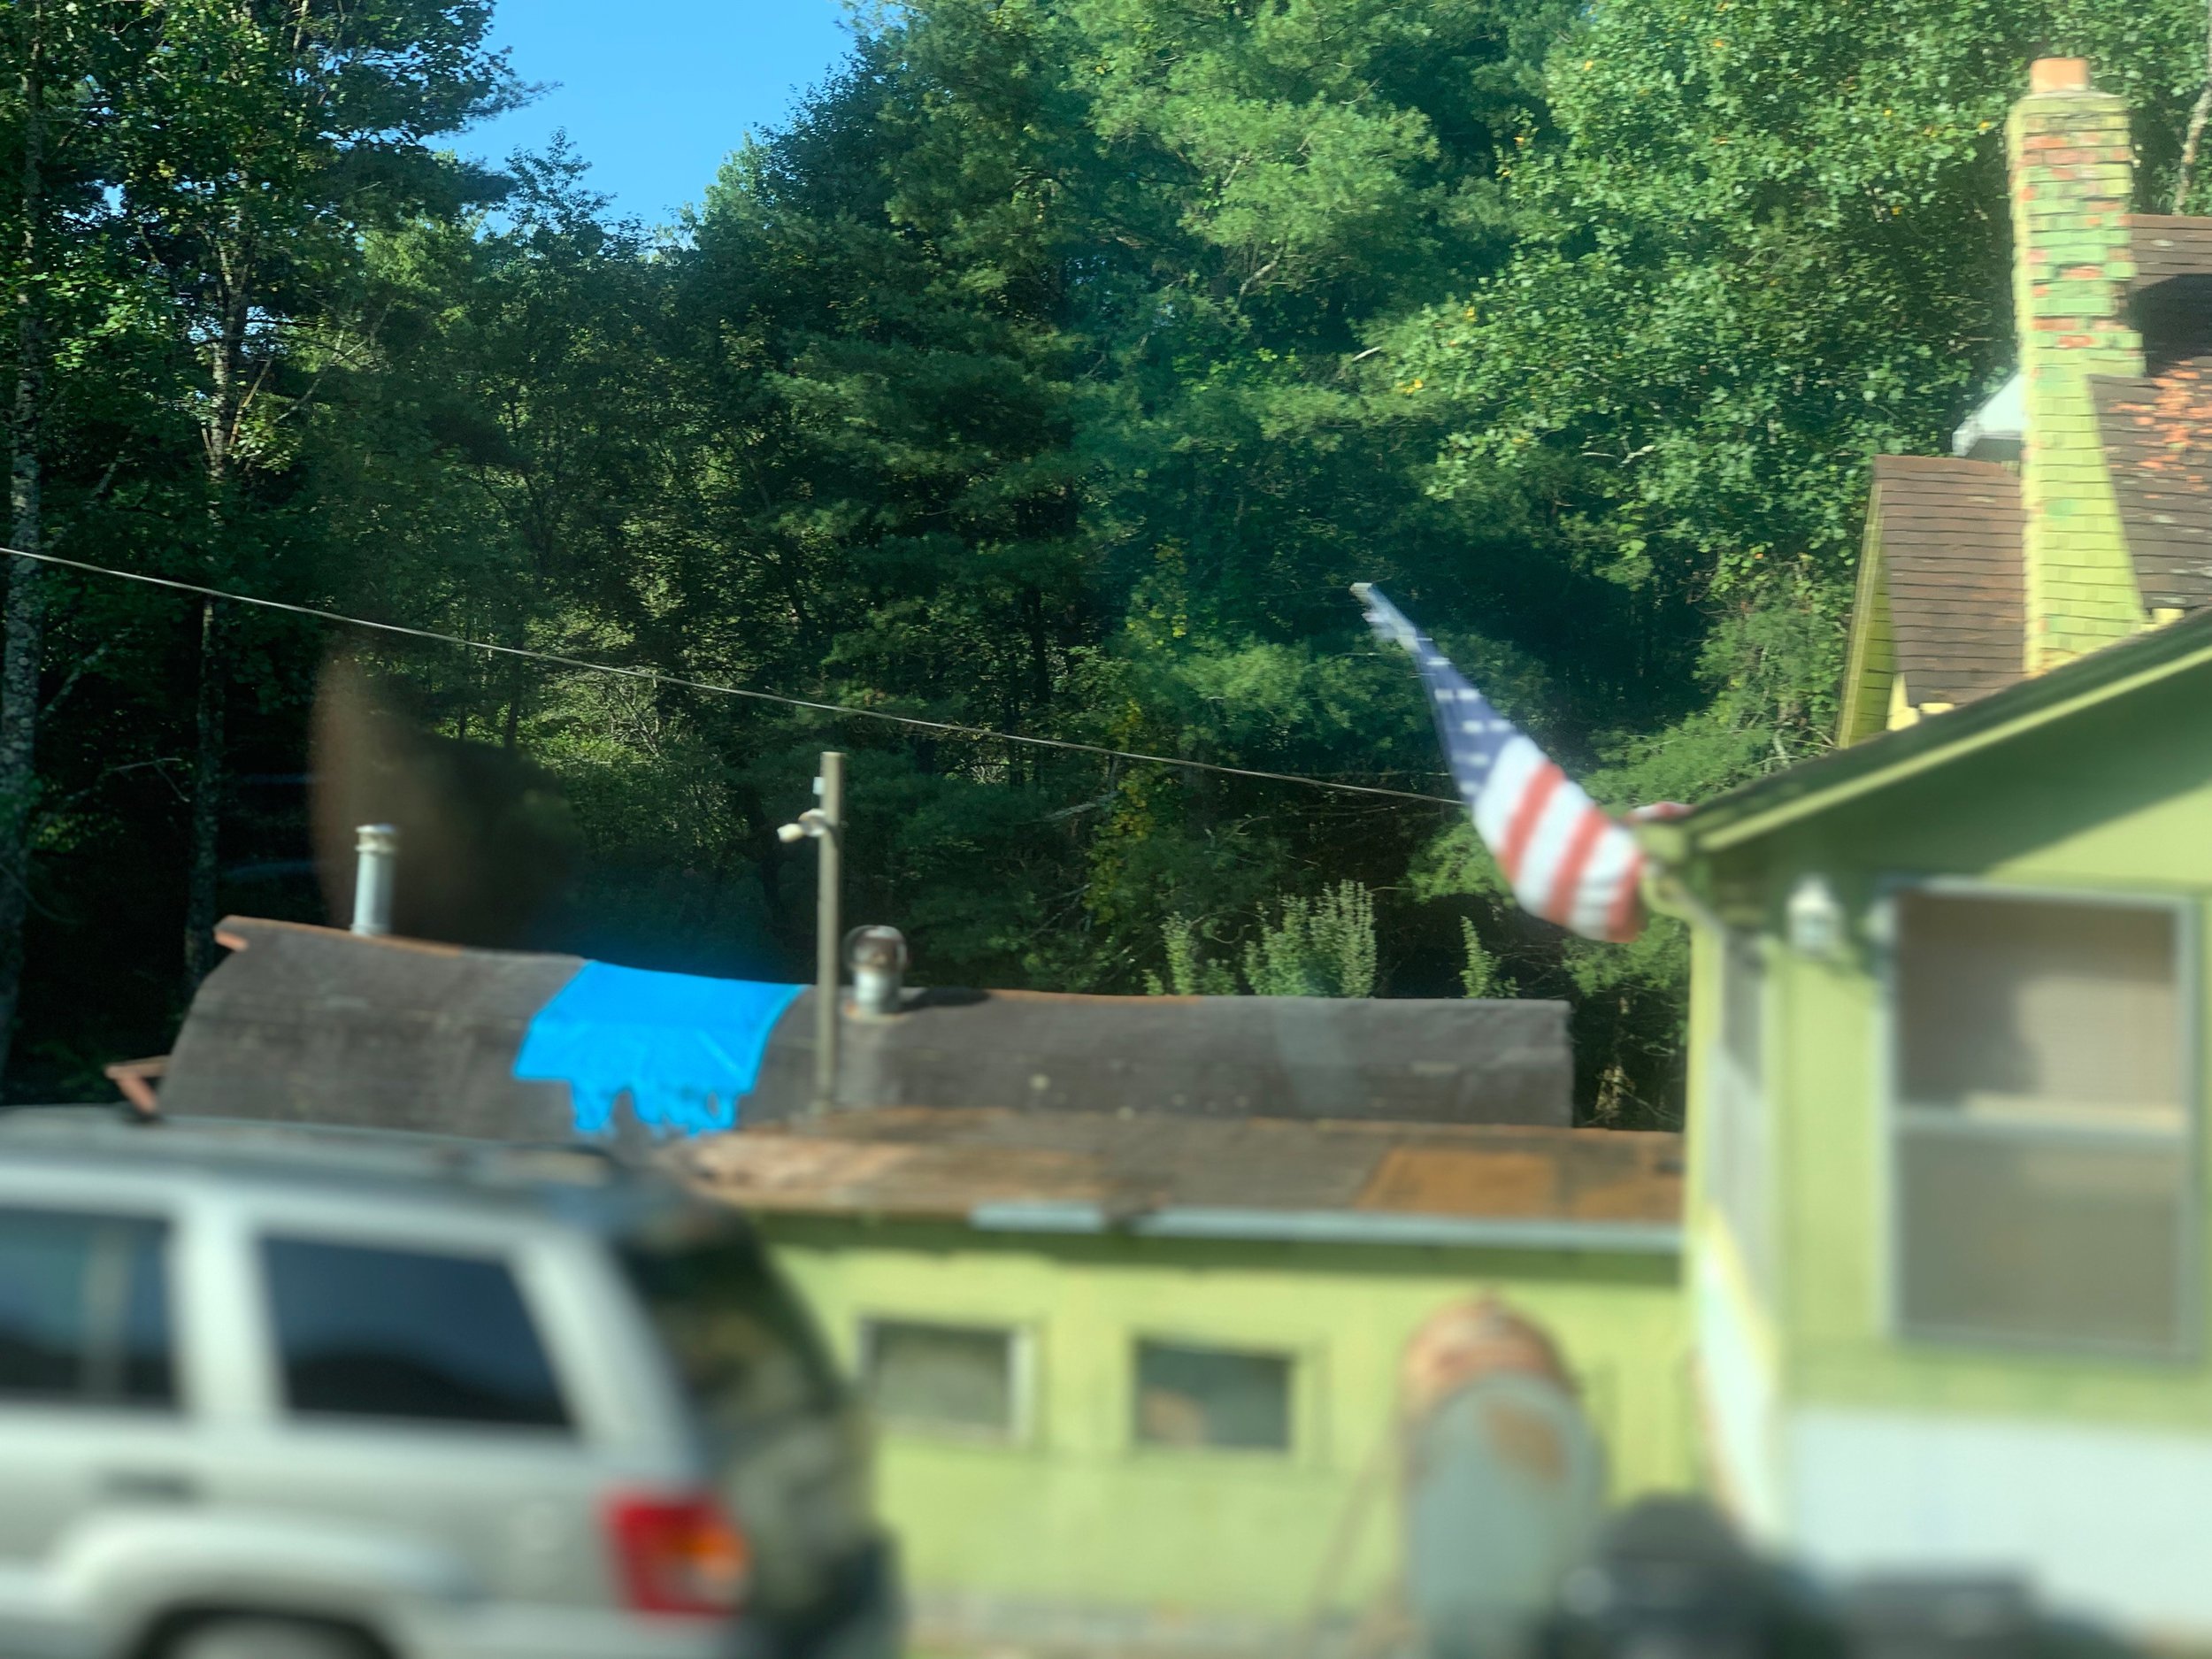  NC 21, Glade Valley, NC, 2019 